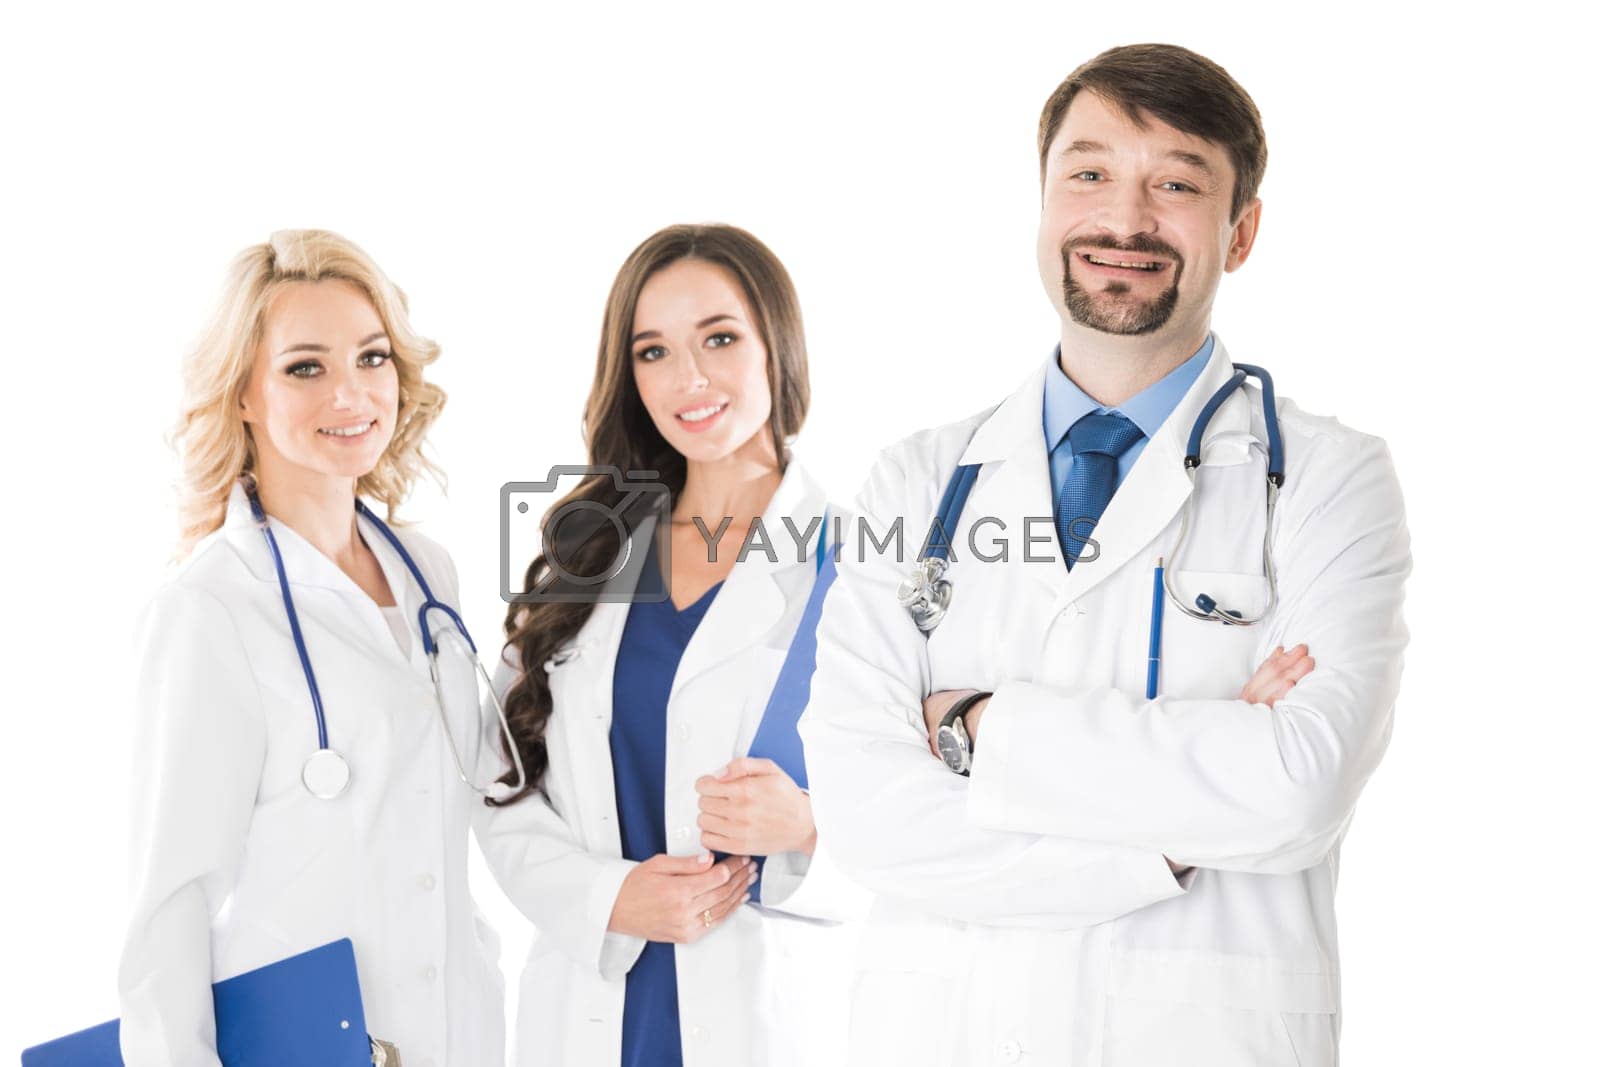 Royalty free image of Medical doctors group by Yellowj